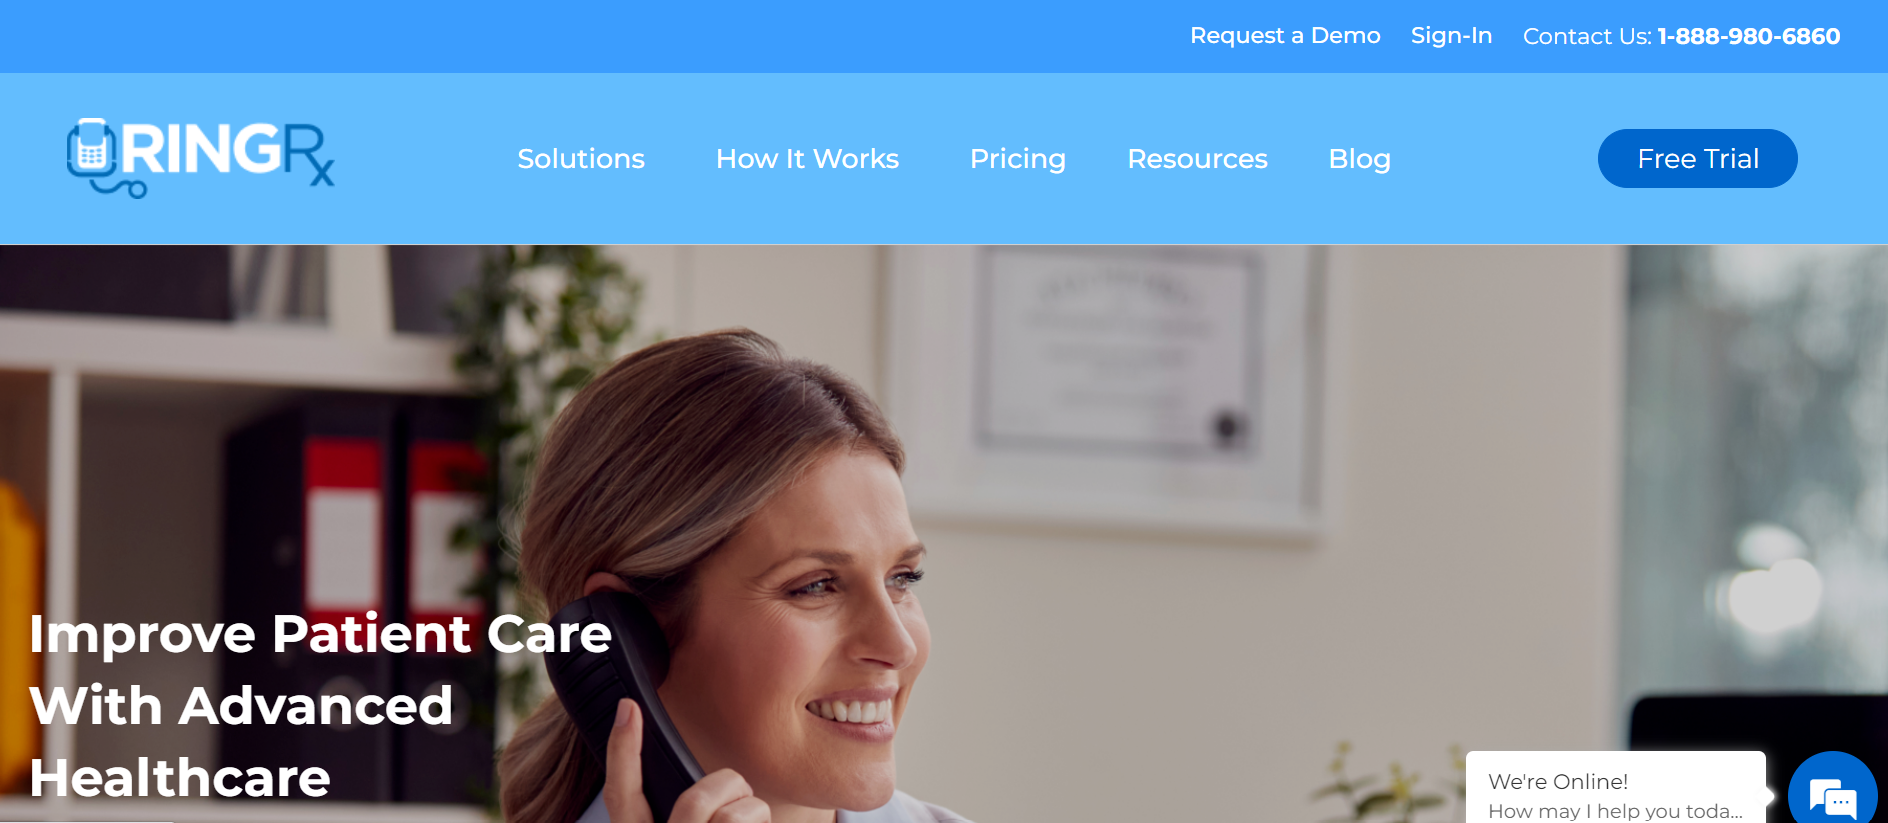 5 Best HIPAA-Compliant Phone Services for Therapists